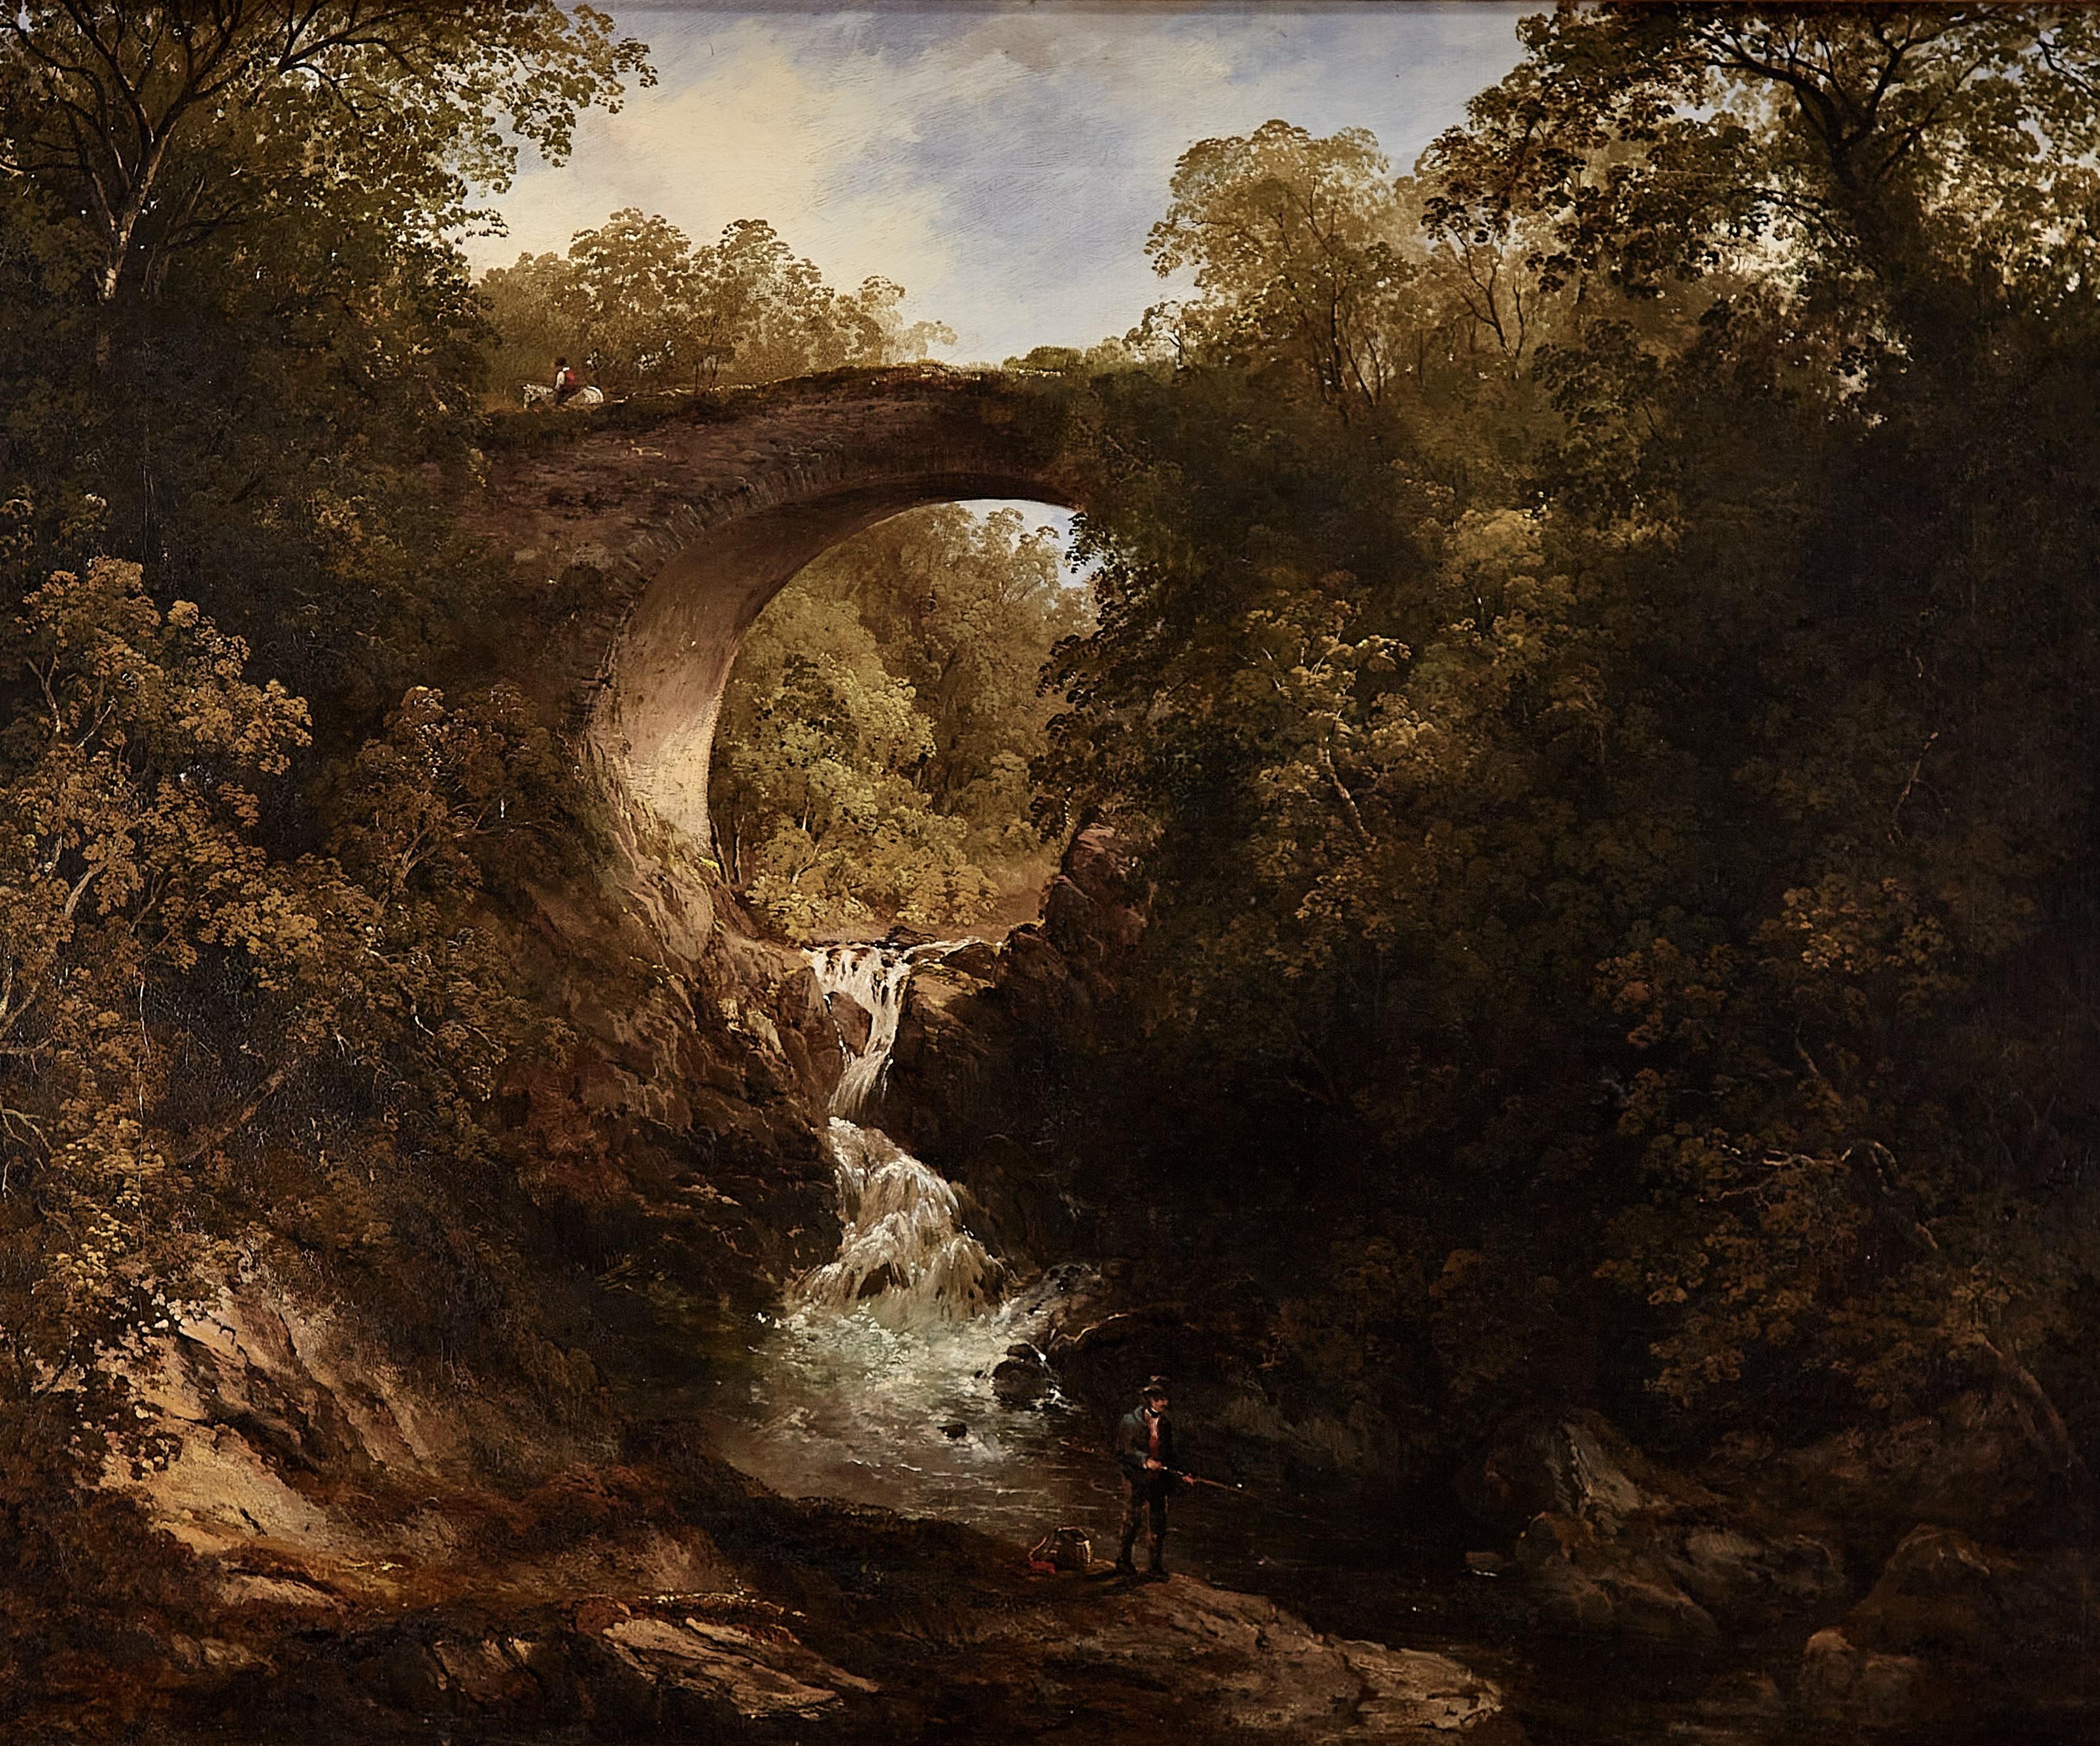 19th century Scottish wooded landscape with stone bridge over a flowing river - Painting by Frances Stoddart